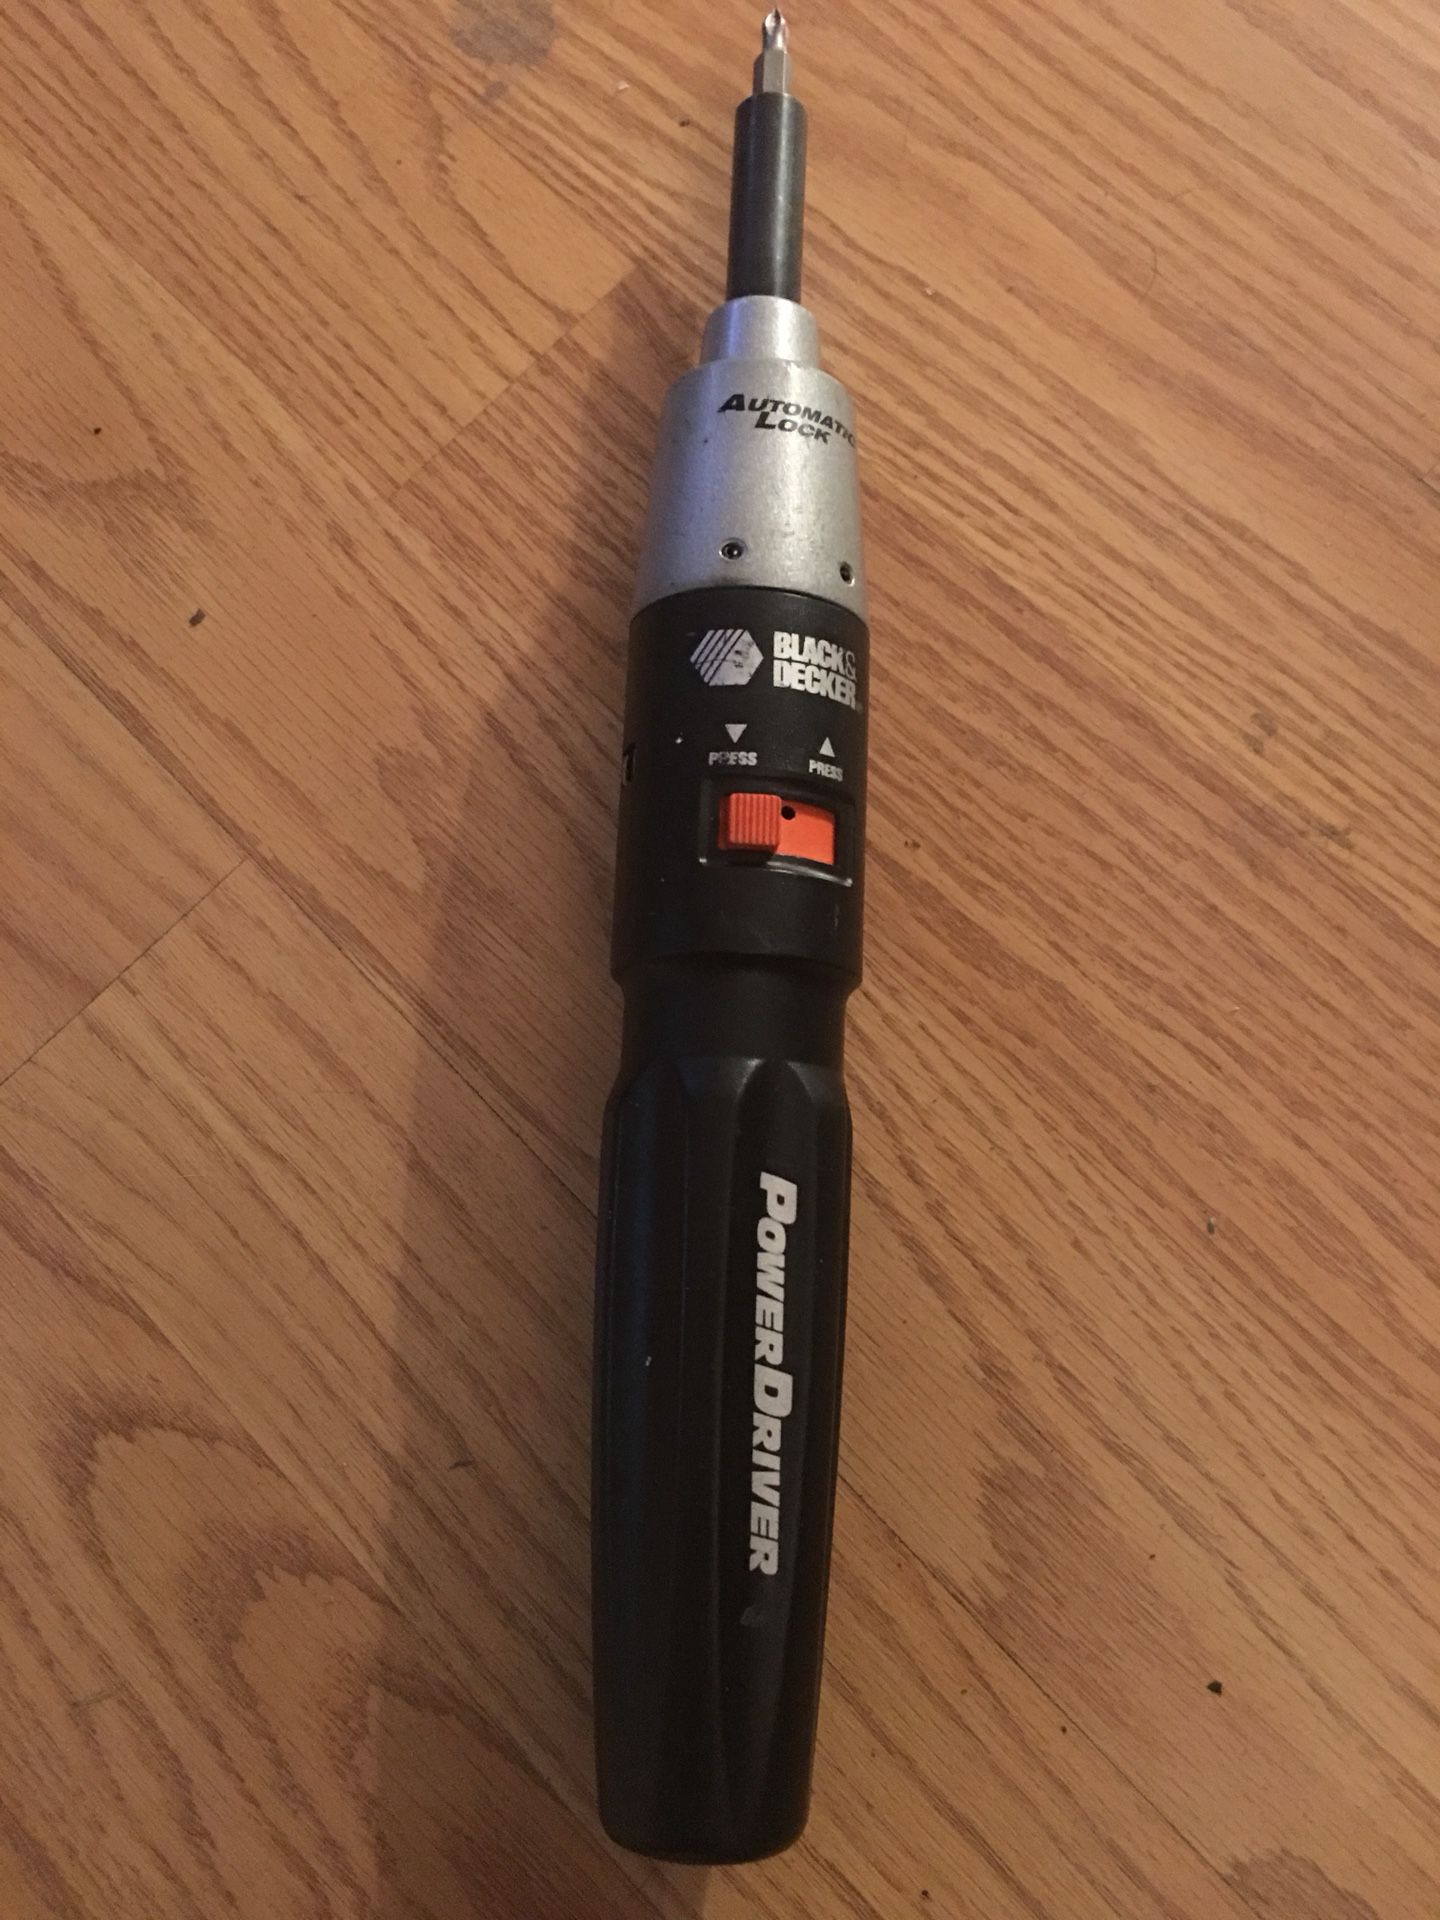 Black and Decker Power Driver With Automatic Lock (Works Good) for